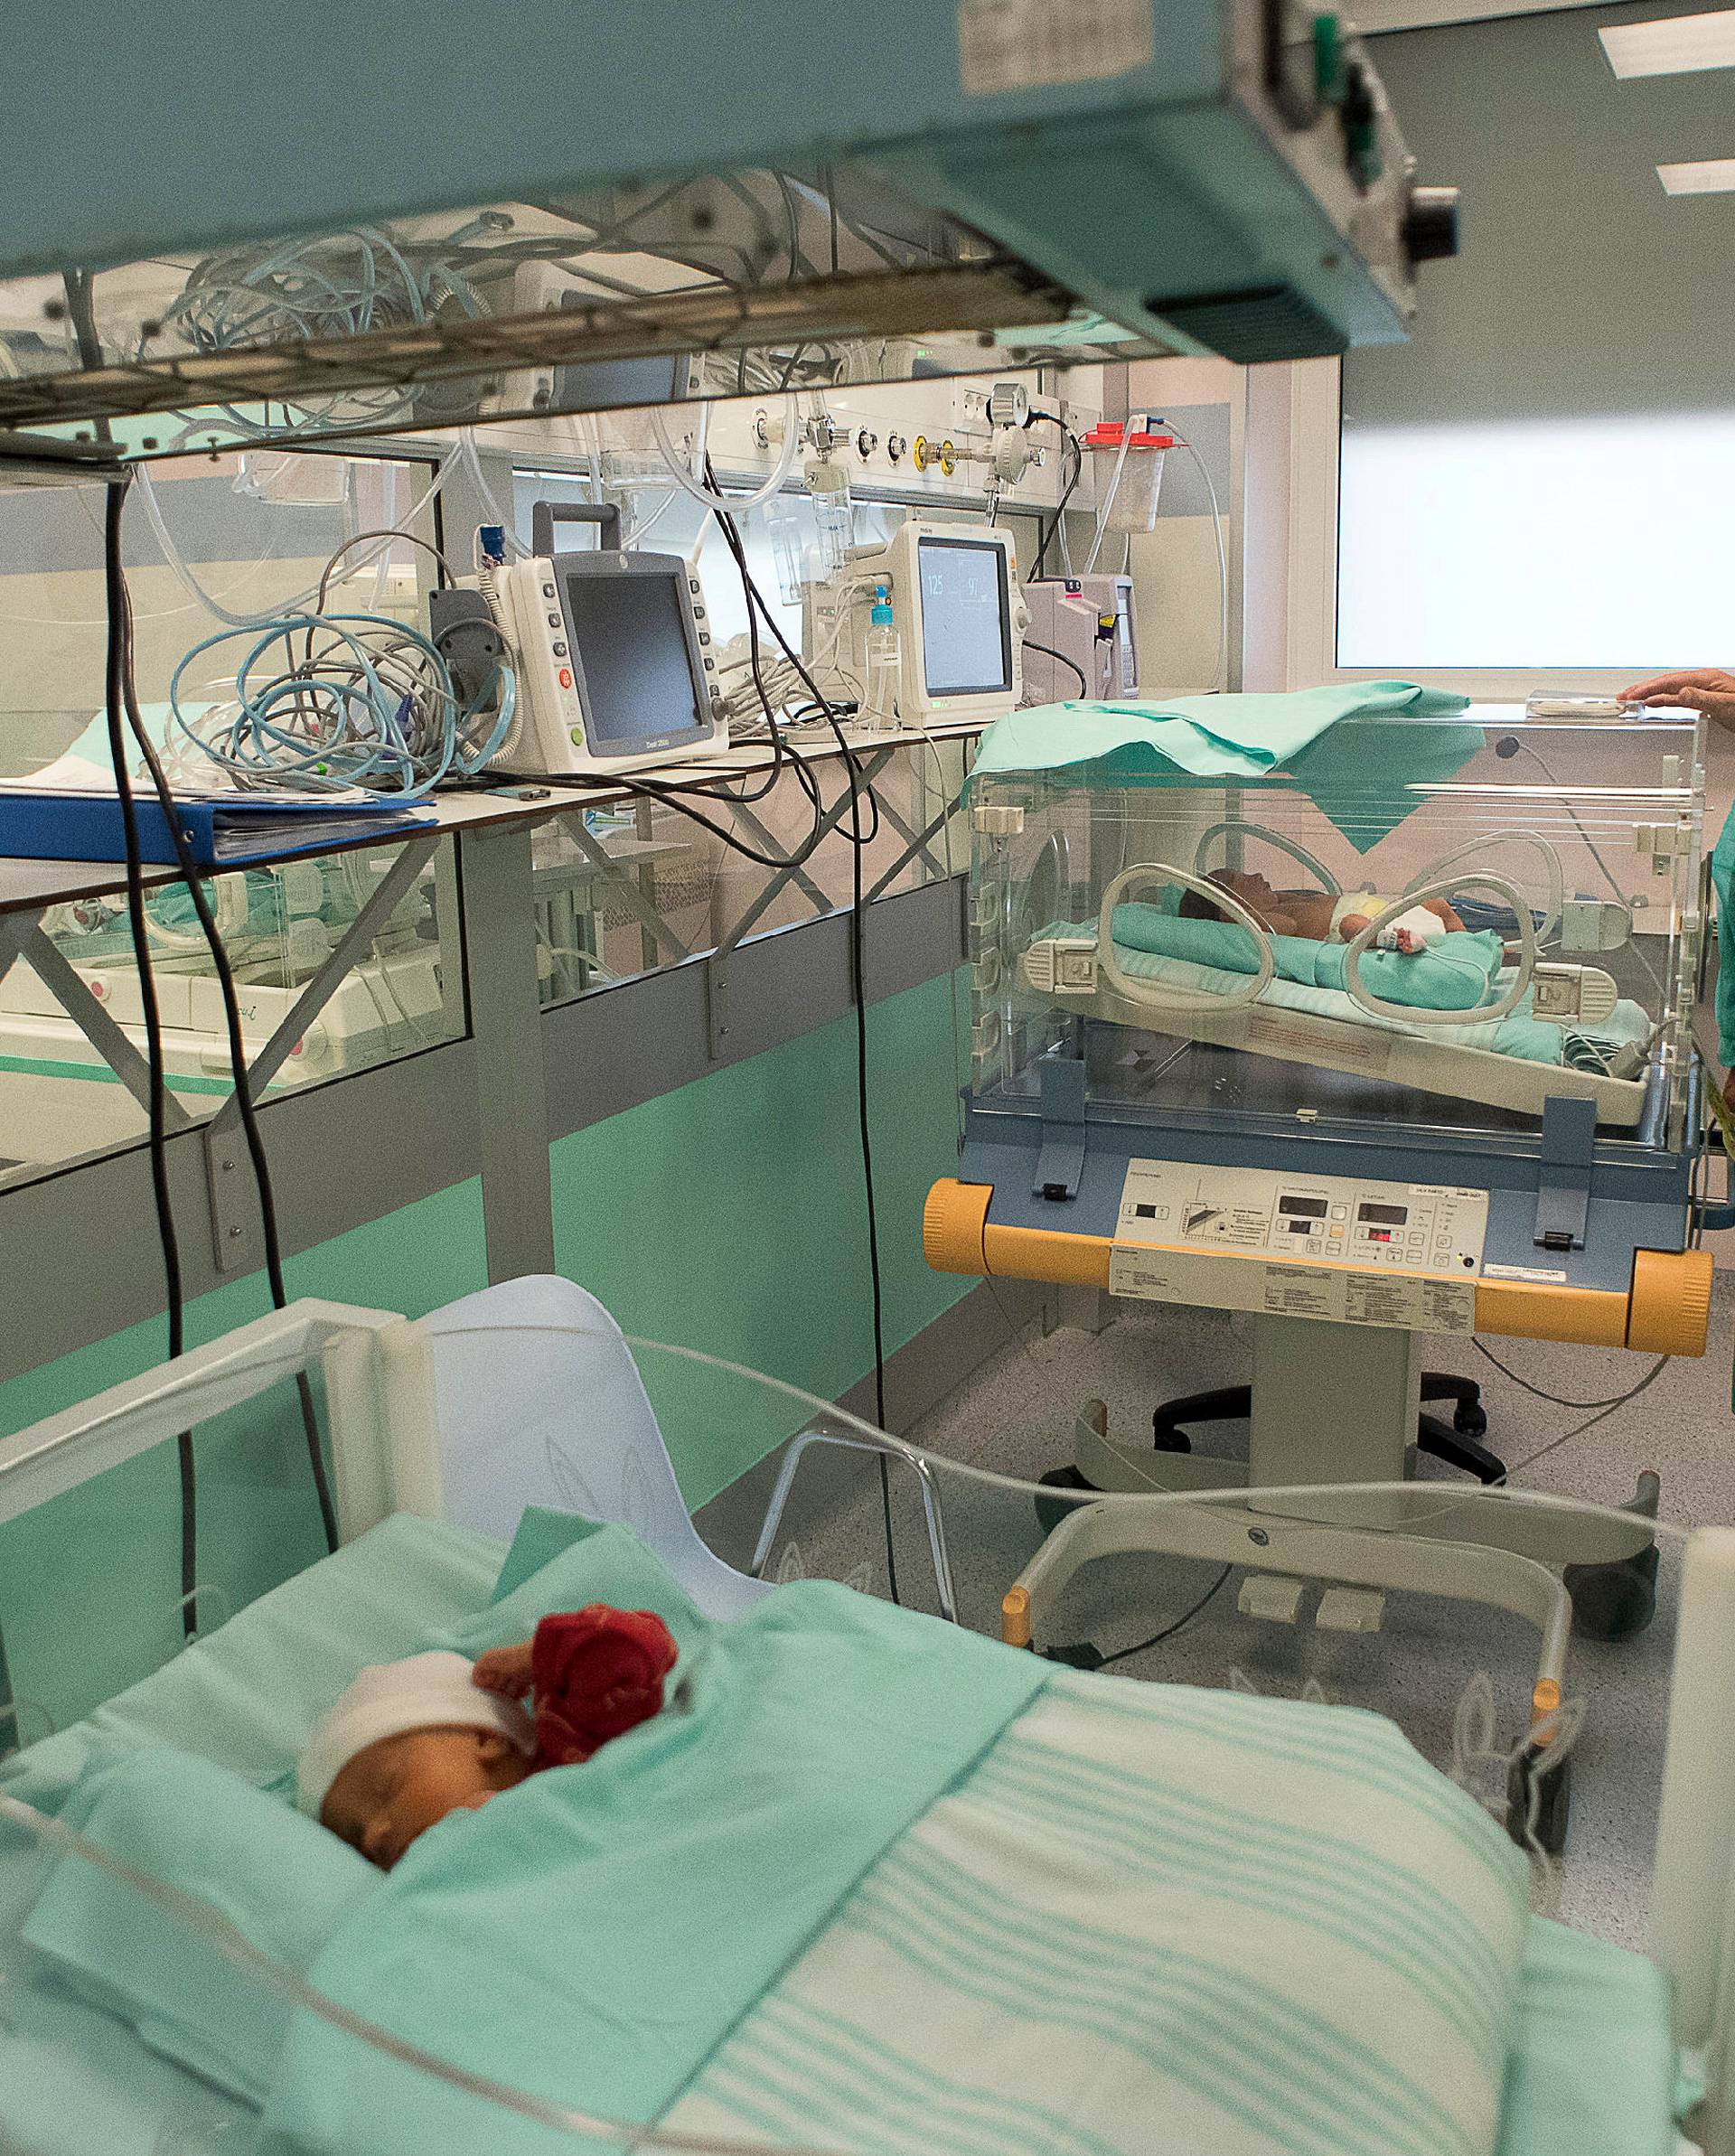 Pope Francis visits the intensive care nursery at the San Giovanni hospital in Rome